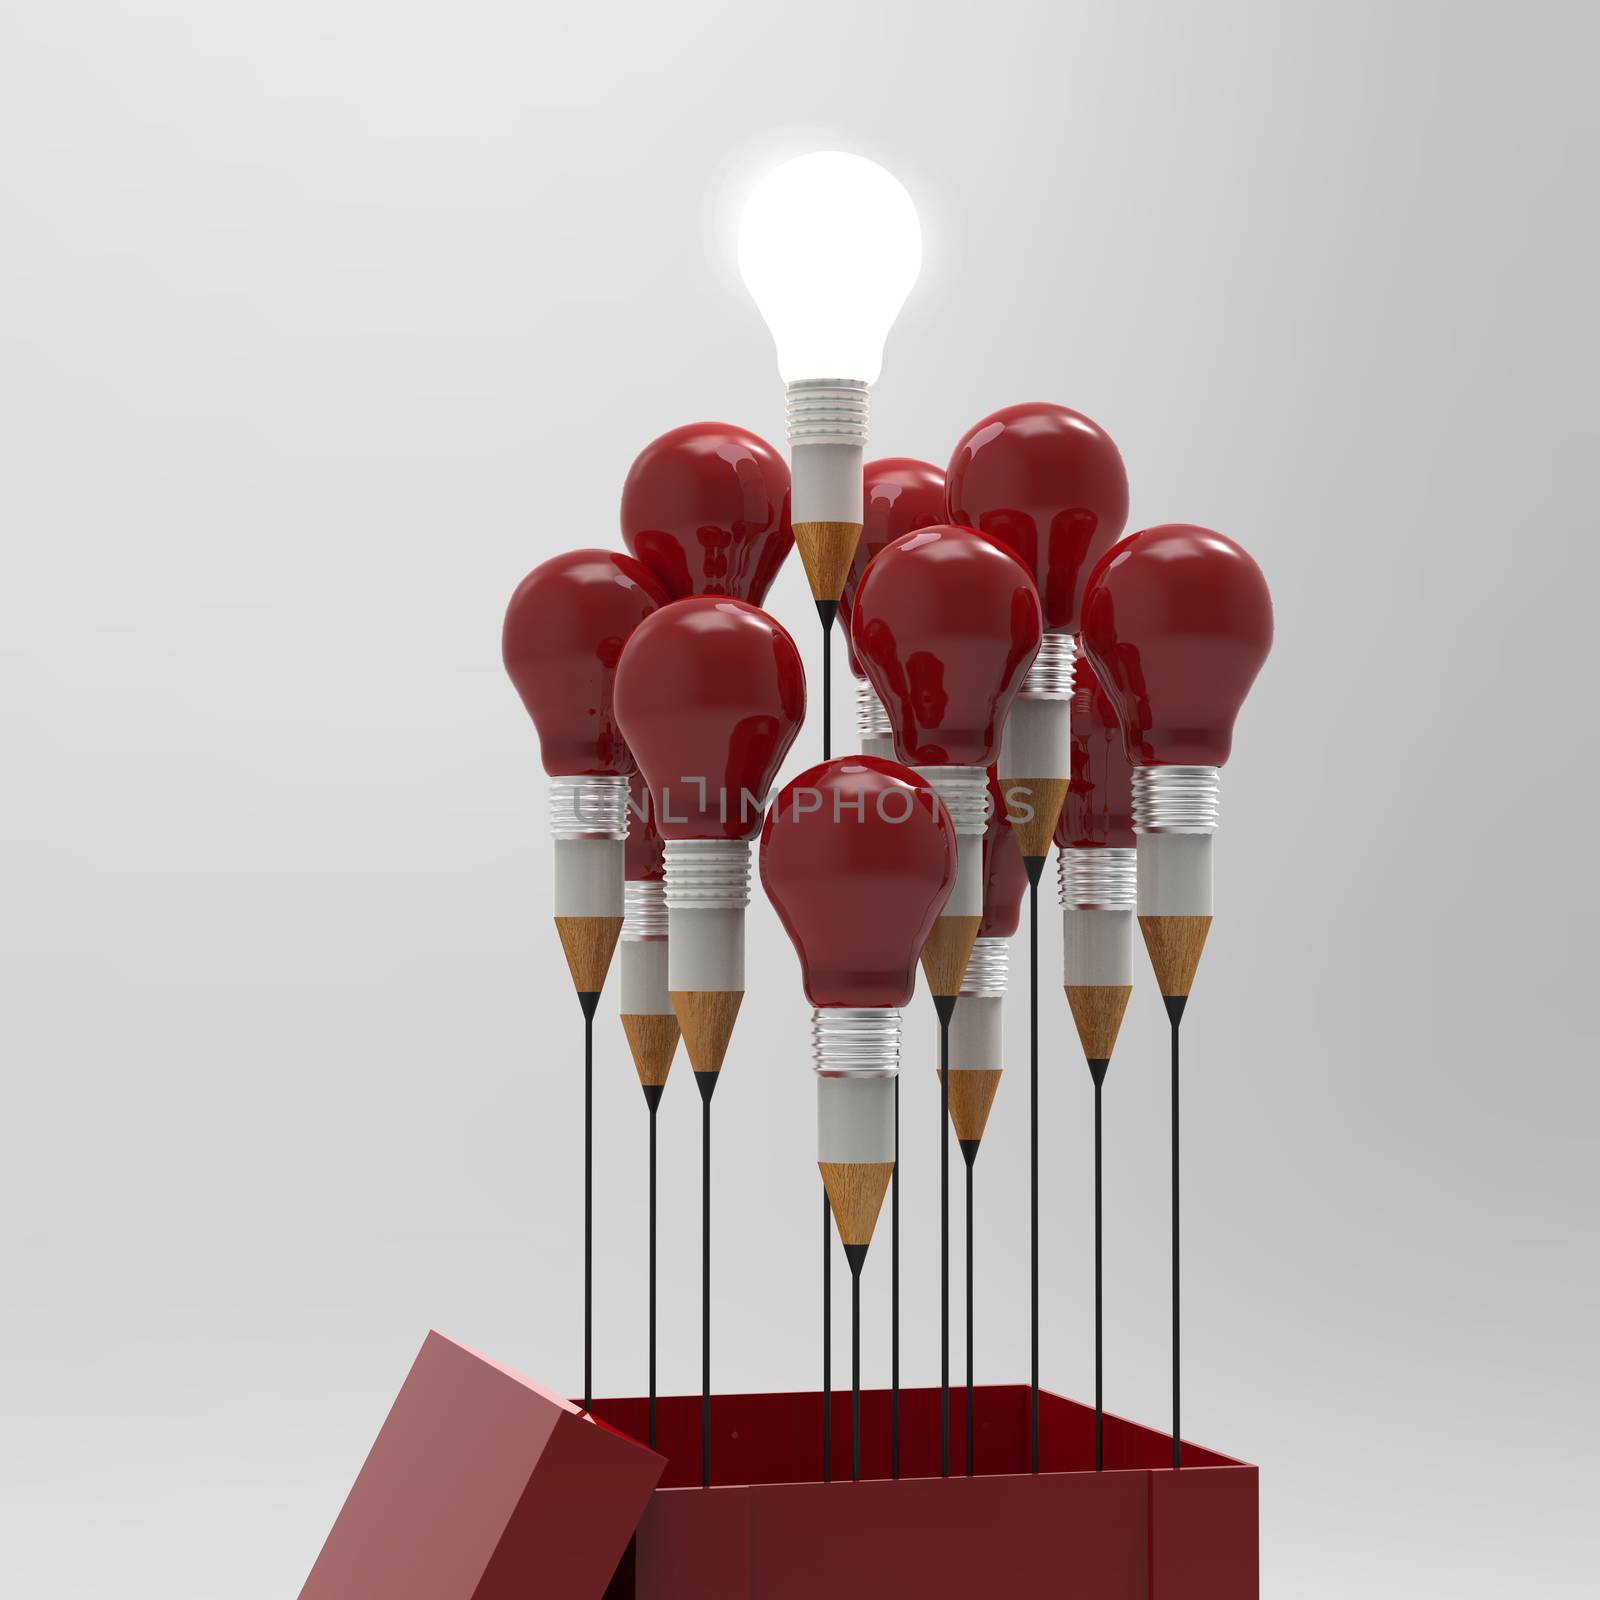 drawing idea pencil and light bulb concept outside the box as creative and leadership concept

